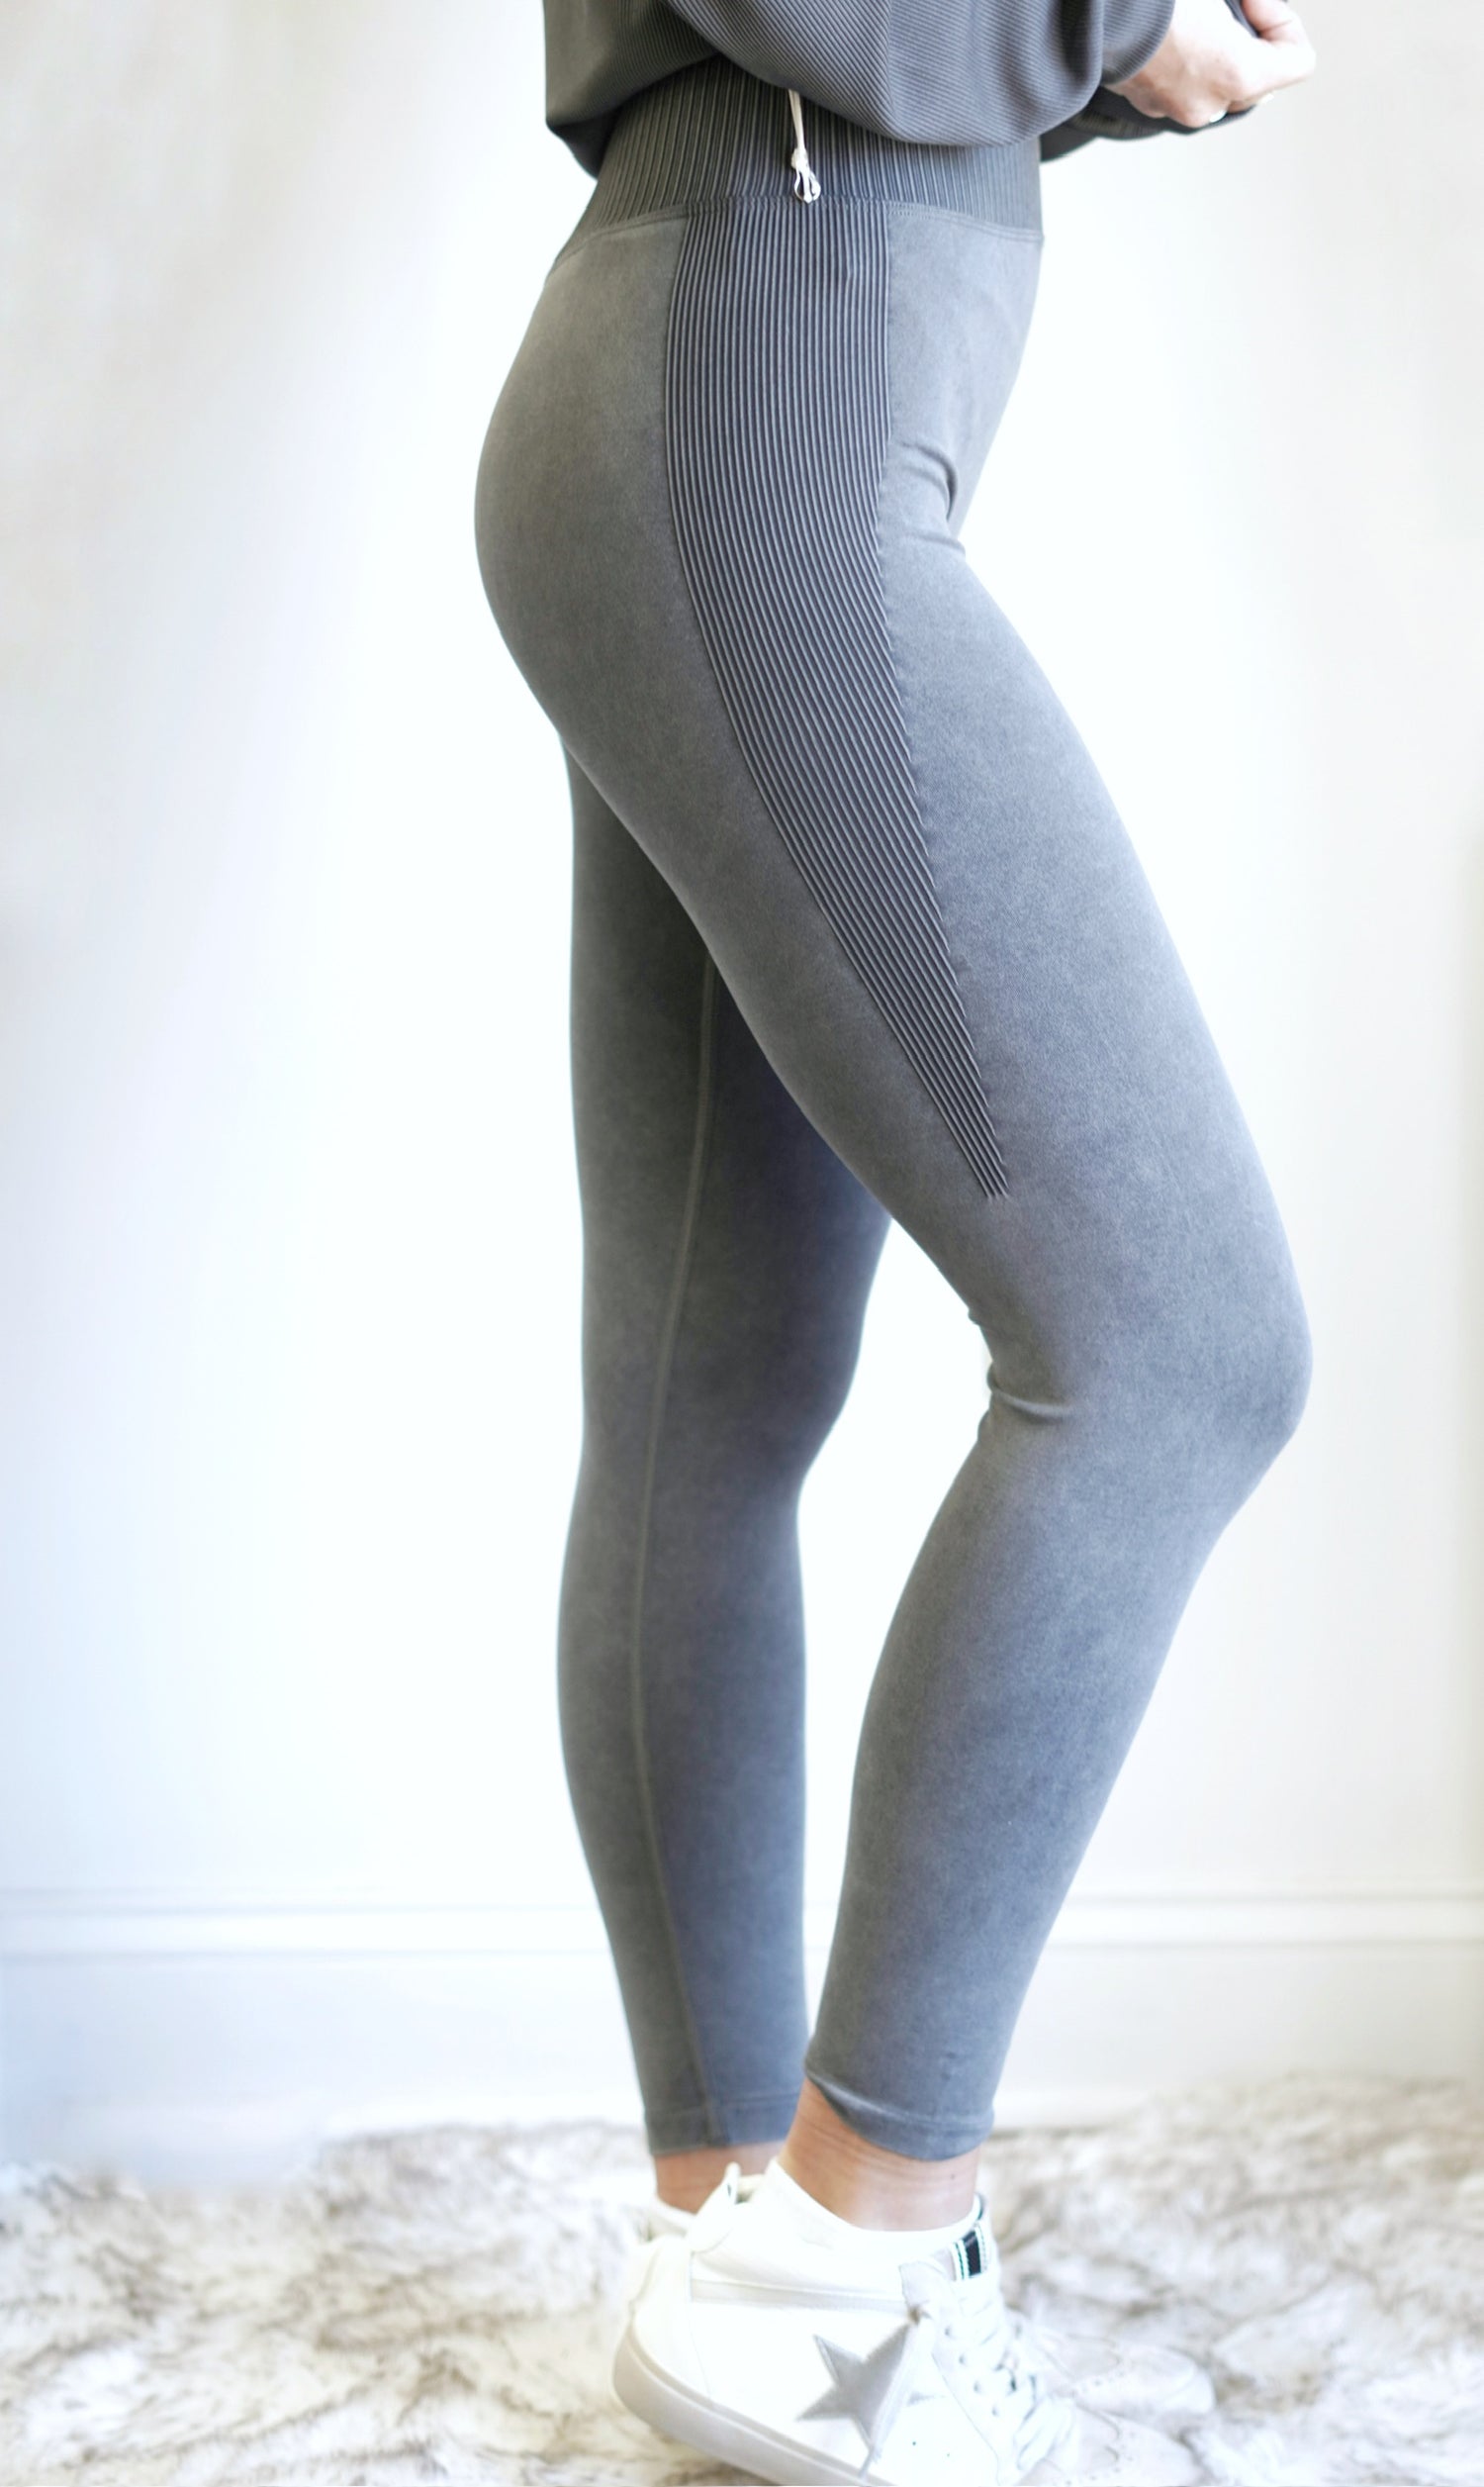 Wash Out Seamless 7/8 Leggings